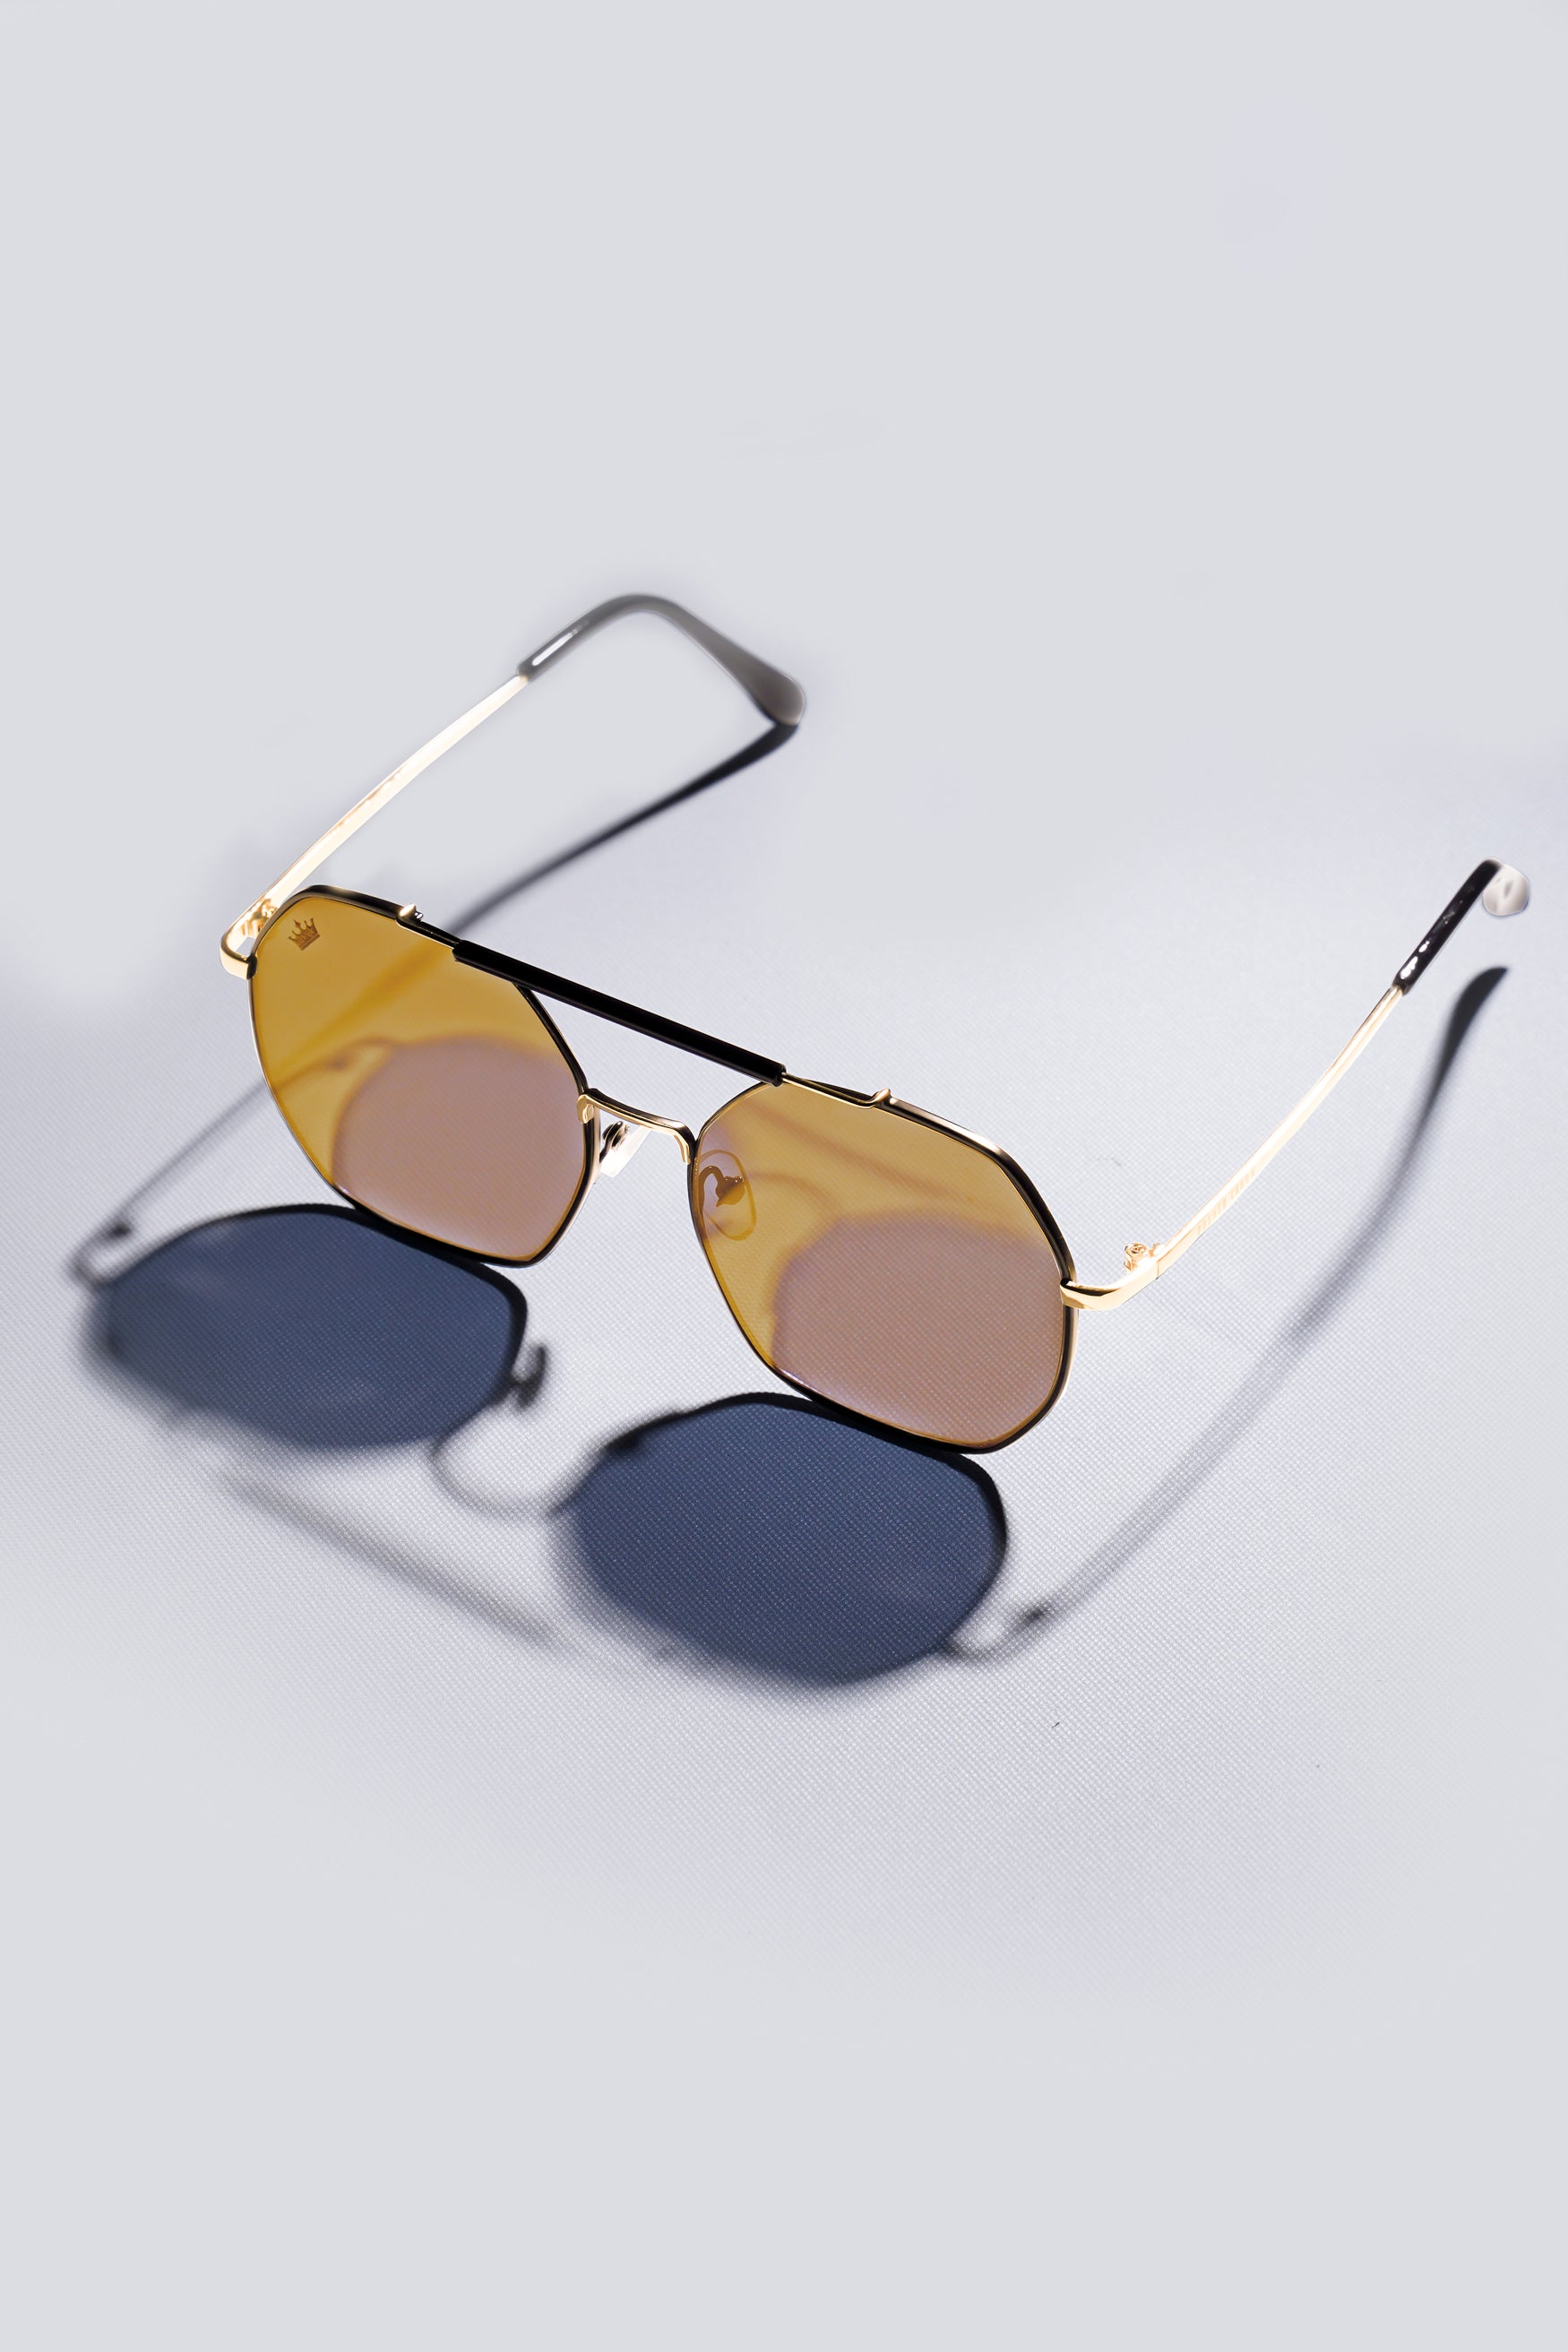 Golden French Crown Oval-Shaped Unisex Sunglasses